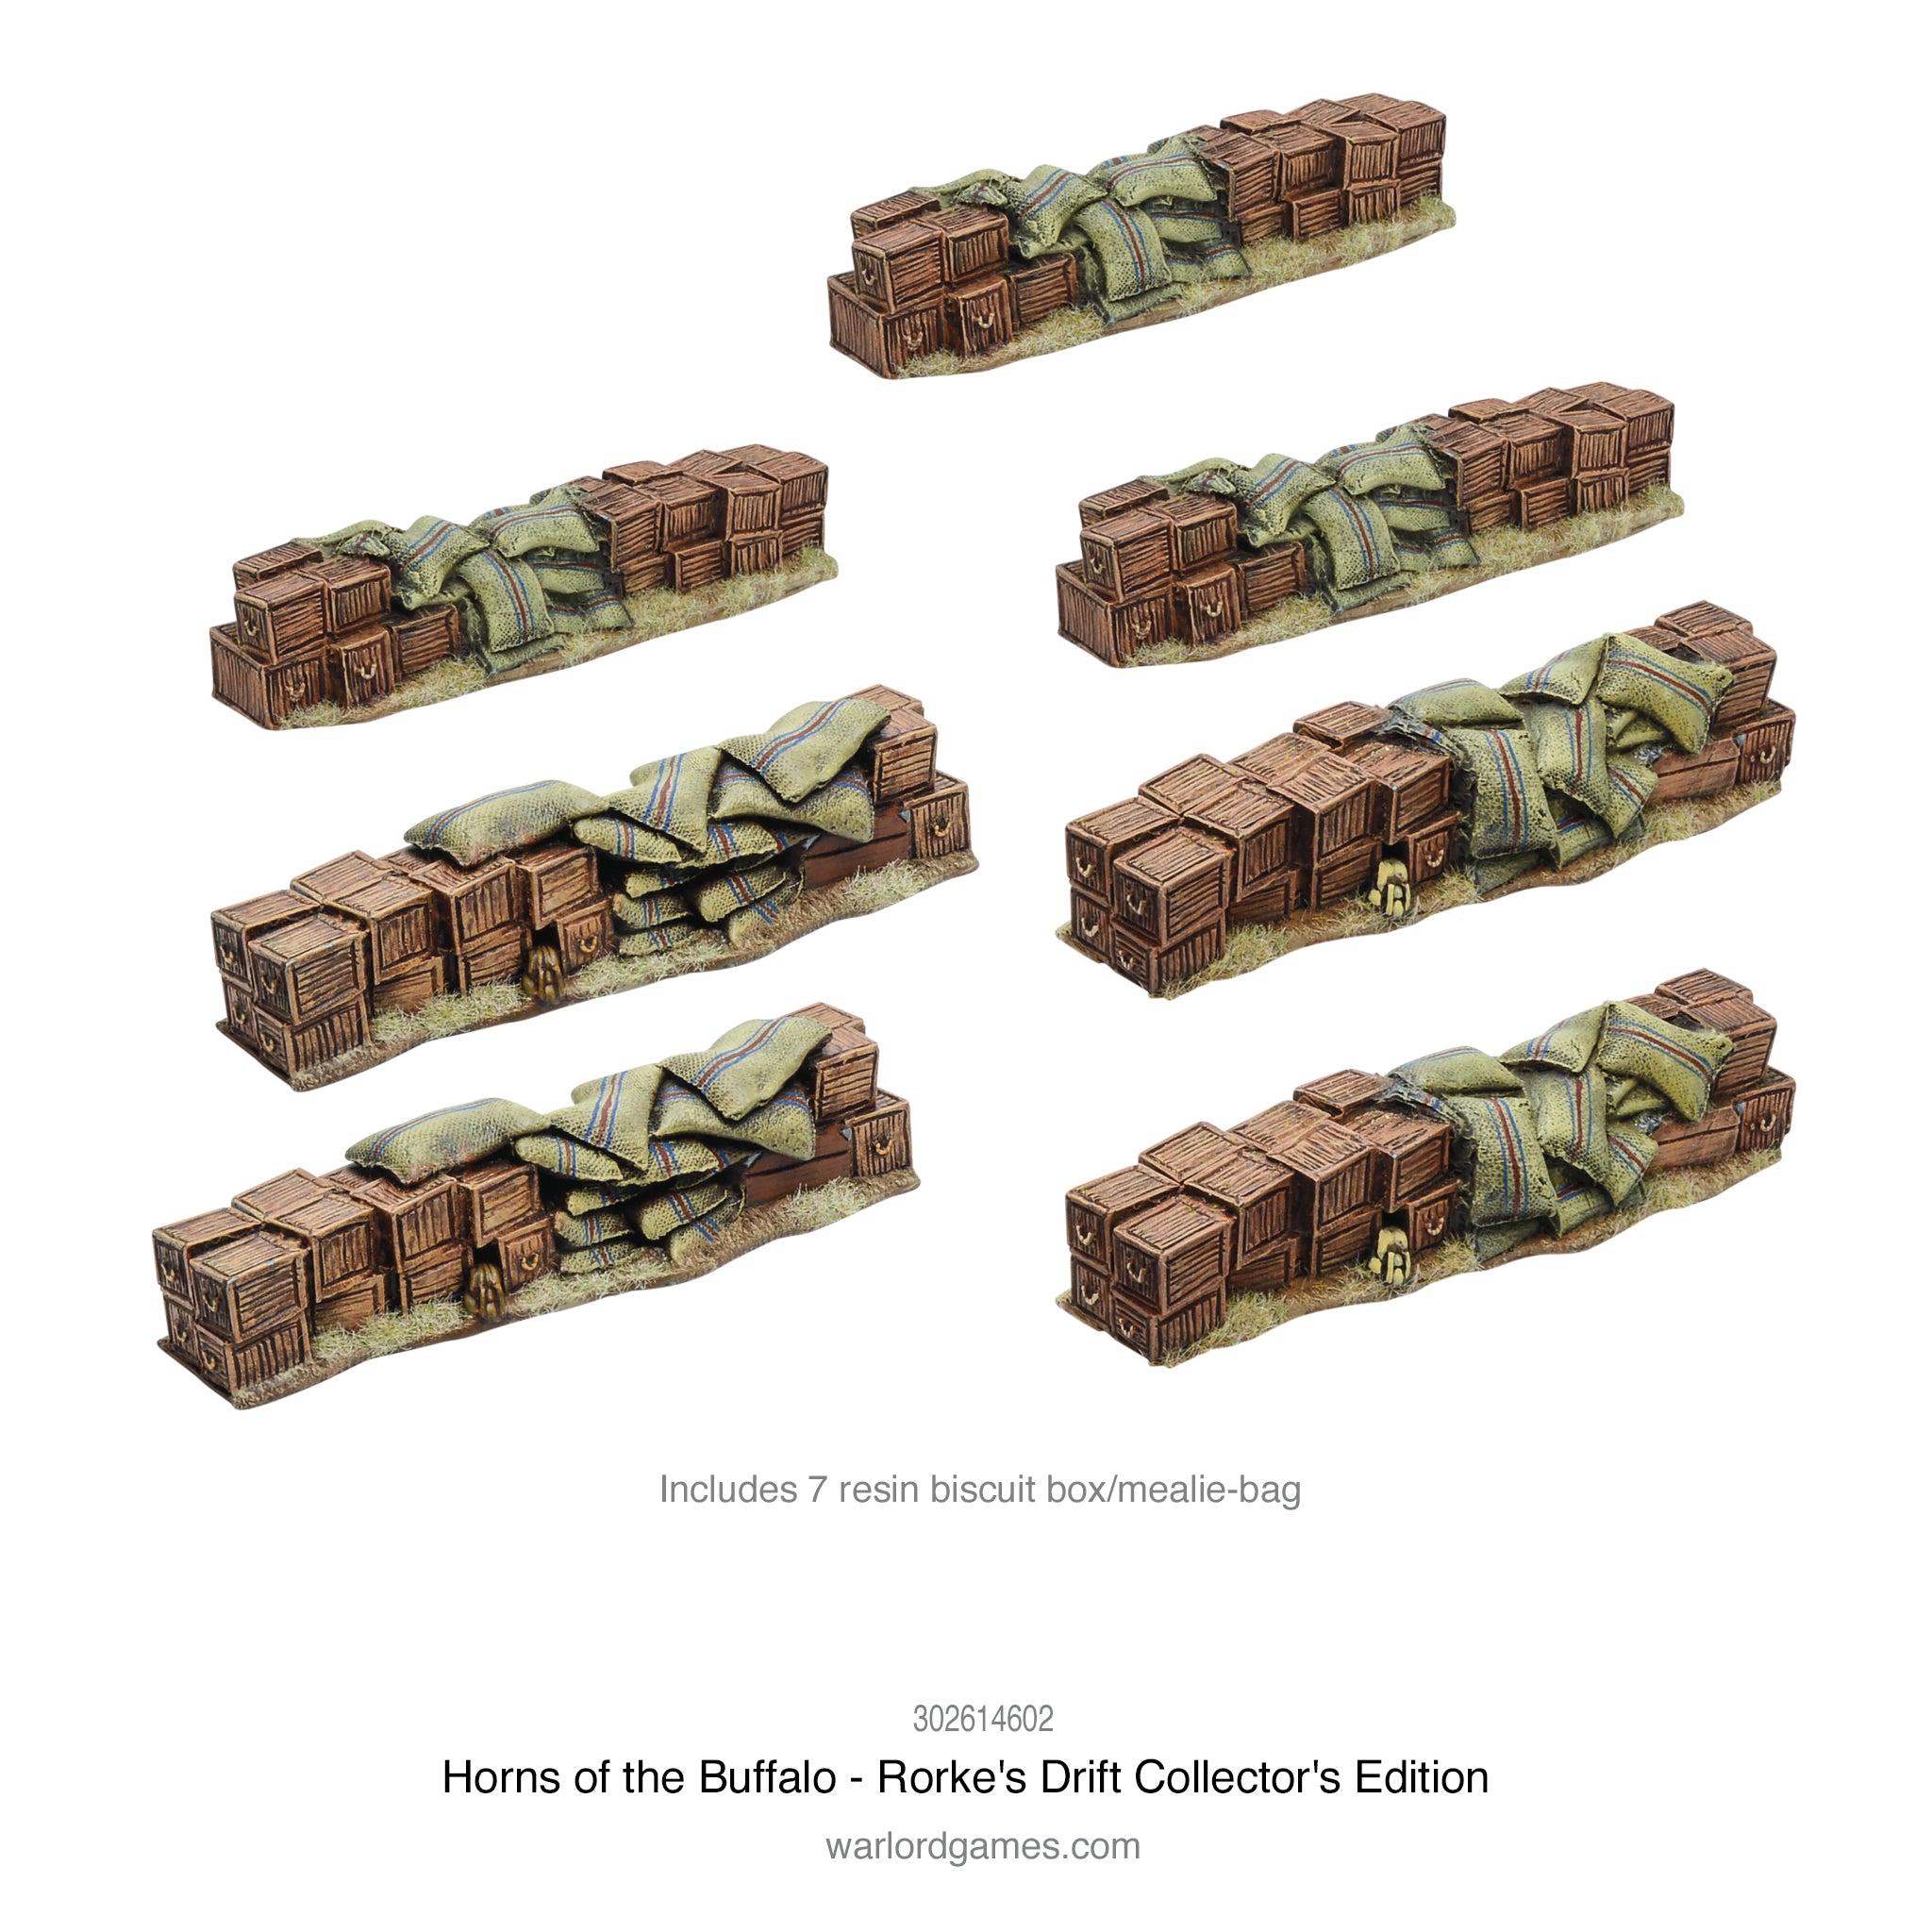 Horns of the Buffalo - Rorke's Drift collectors edition